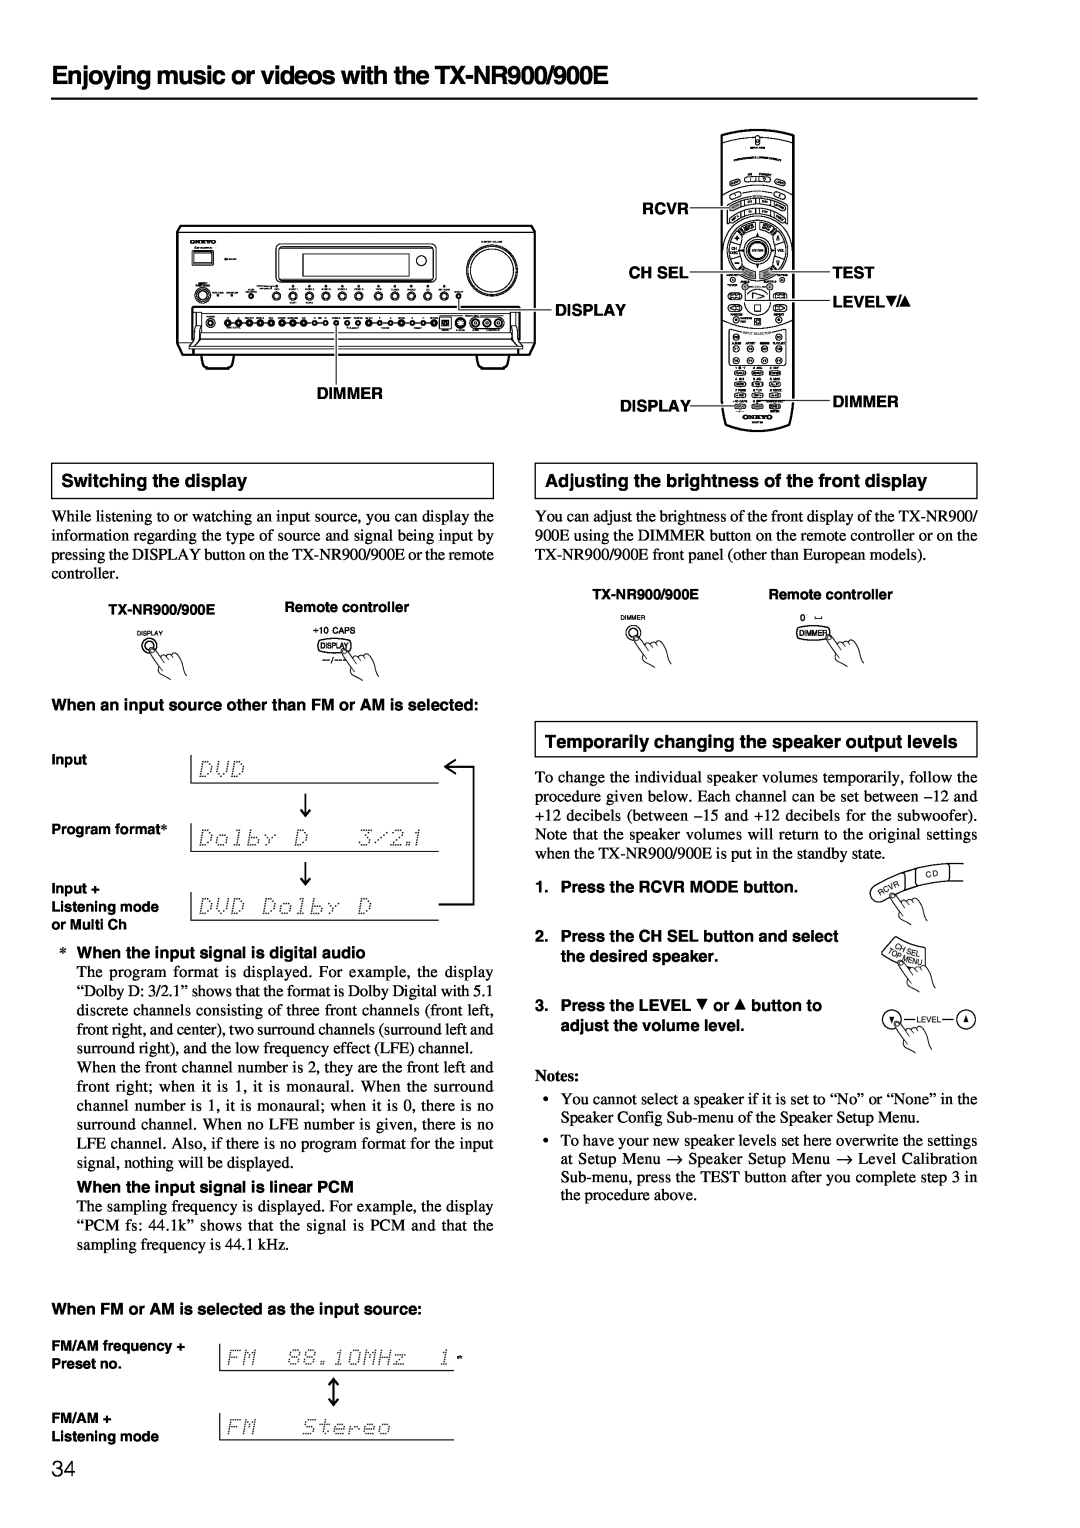 Onkyo TX-NR900E instruction manual Enjoying music or videos with the TX-NR900/900E, Switching the display 